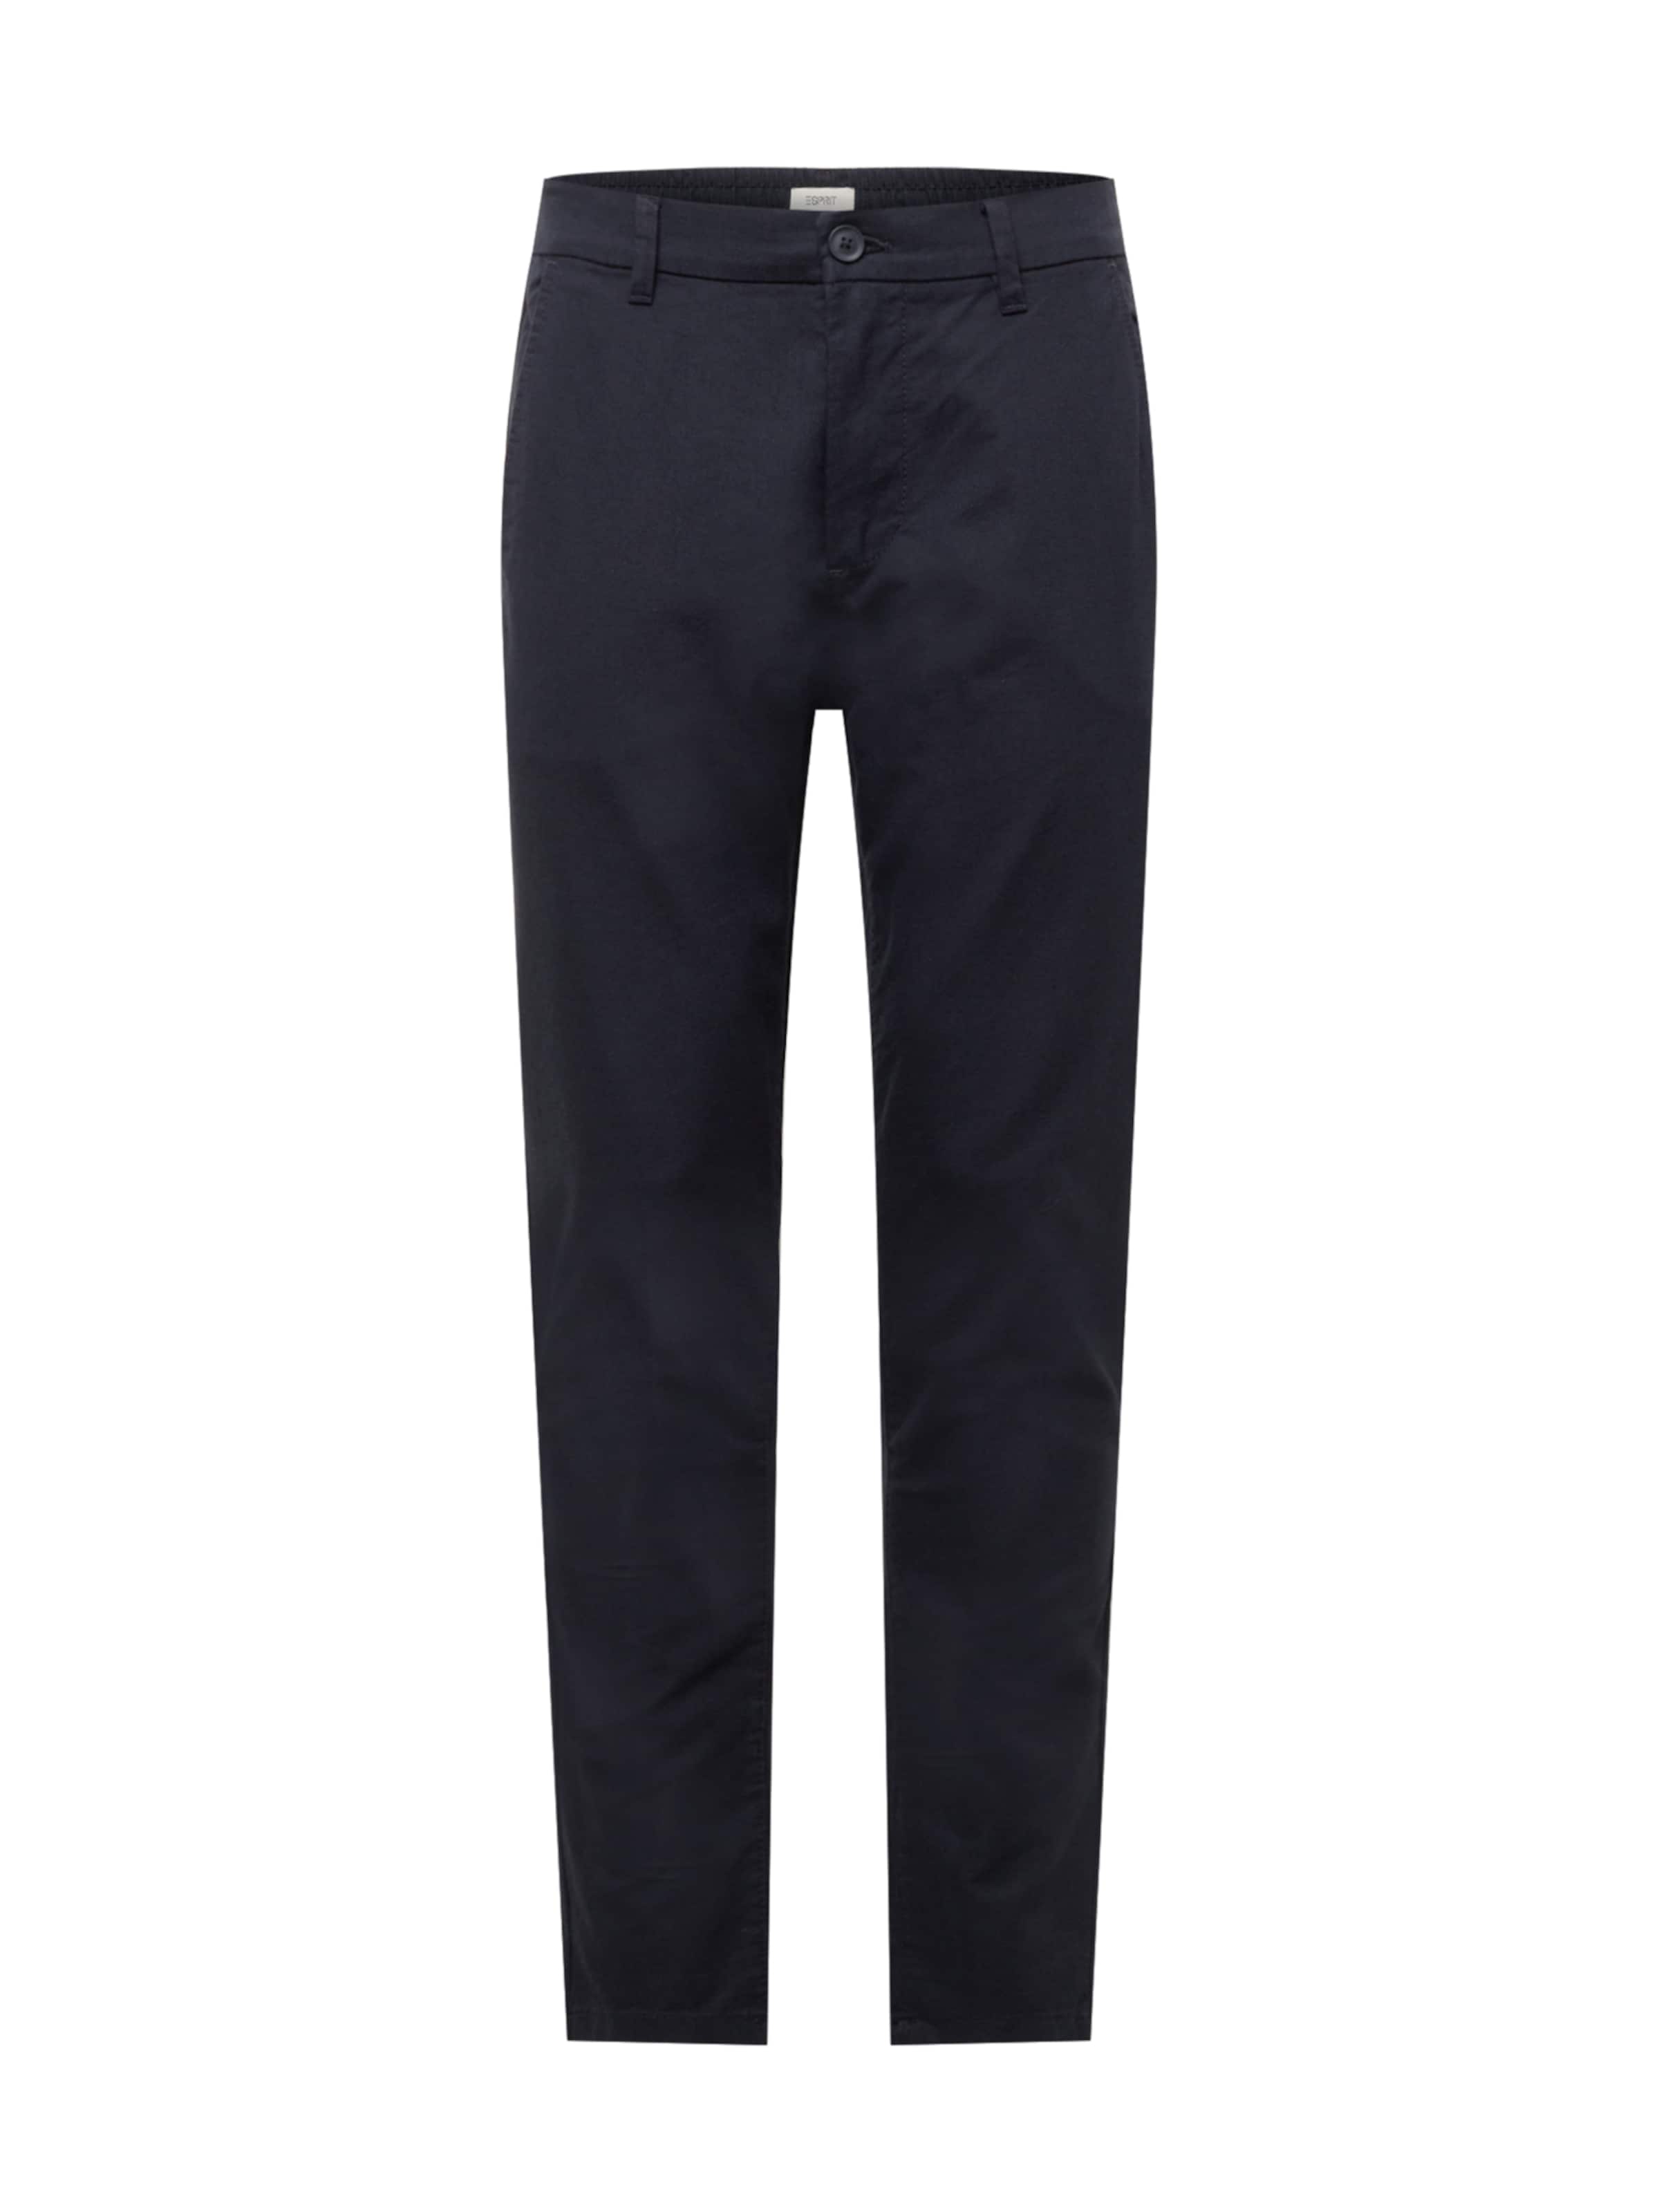 Esprit Chino In Relaxed Fit | Mens jeans fit, Mens outfits, Mens jeans